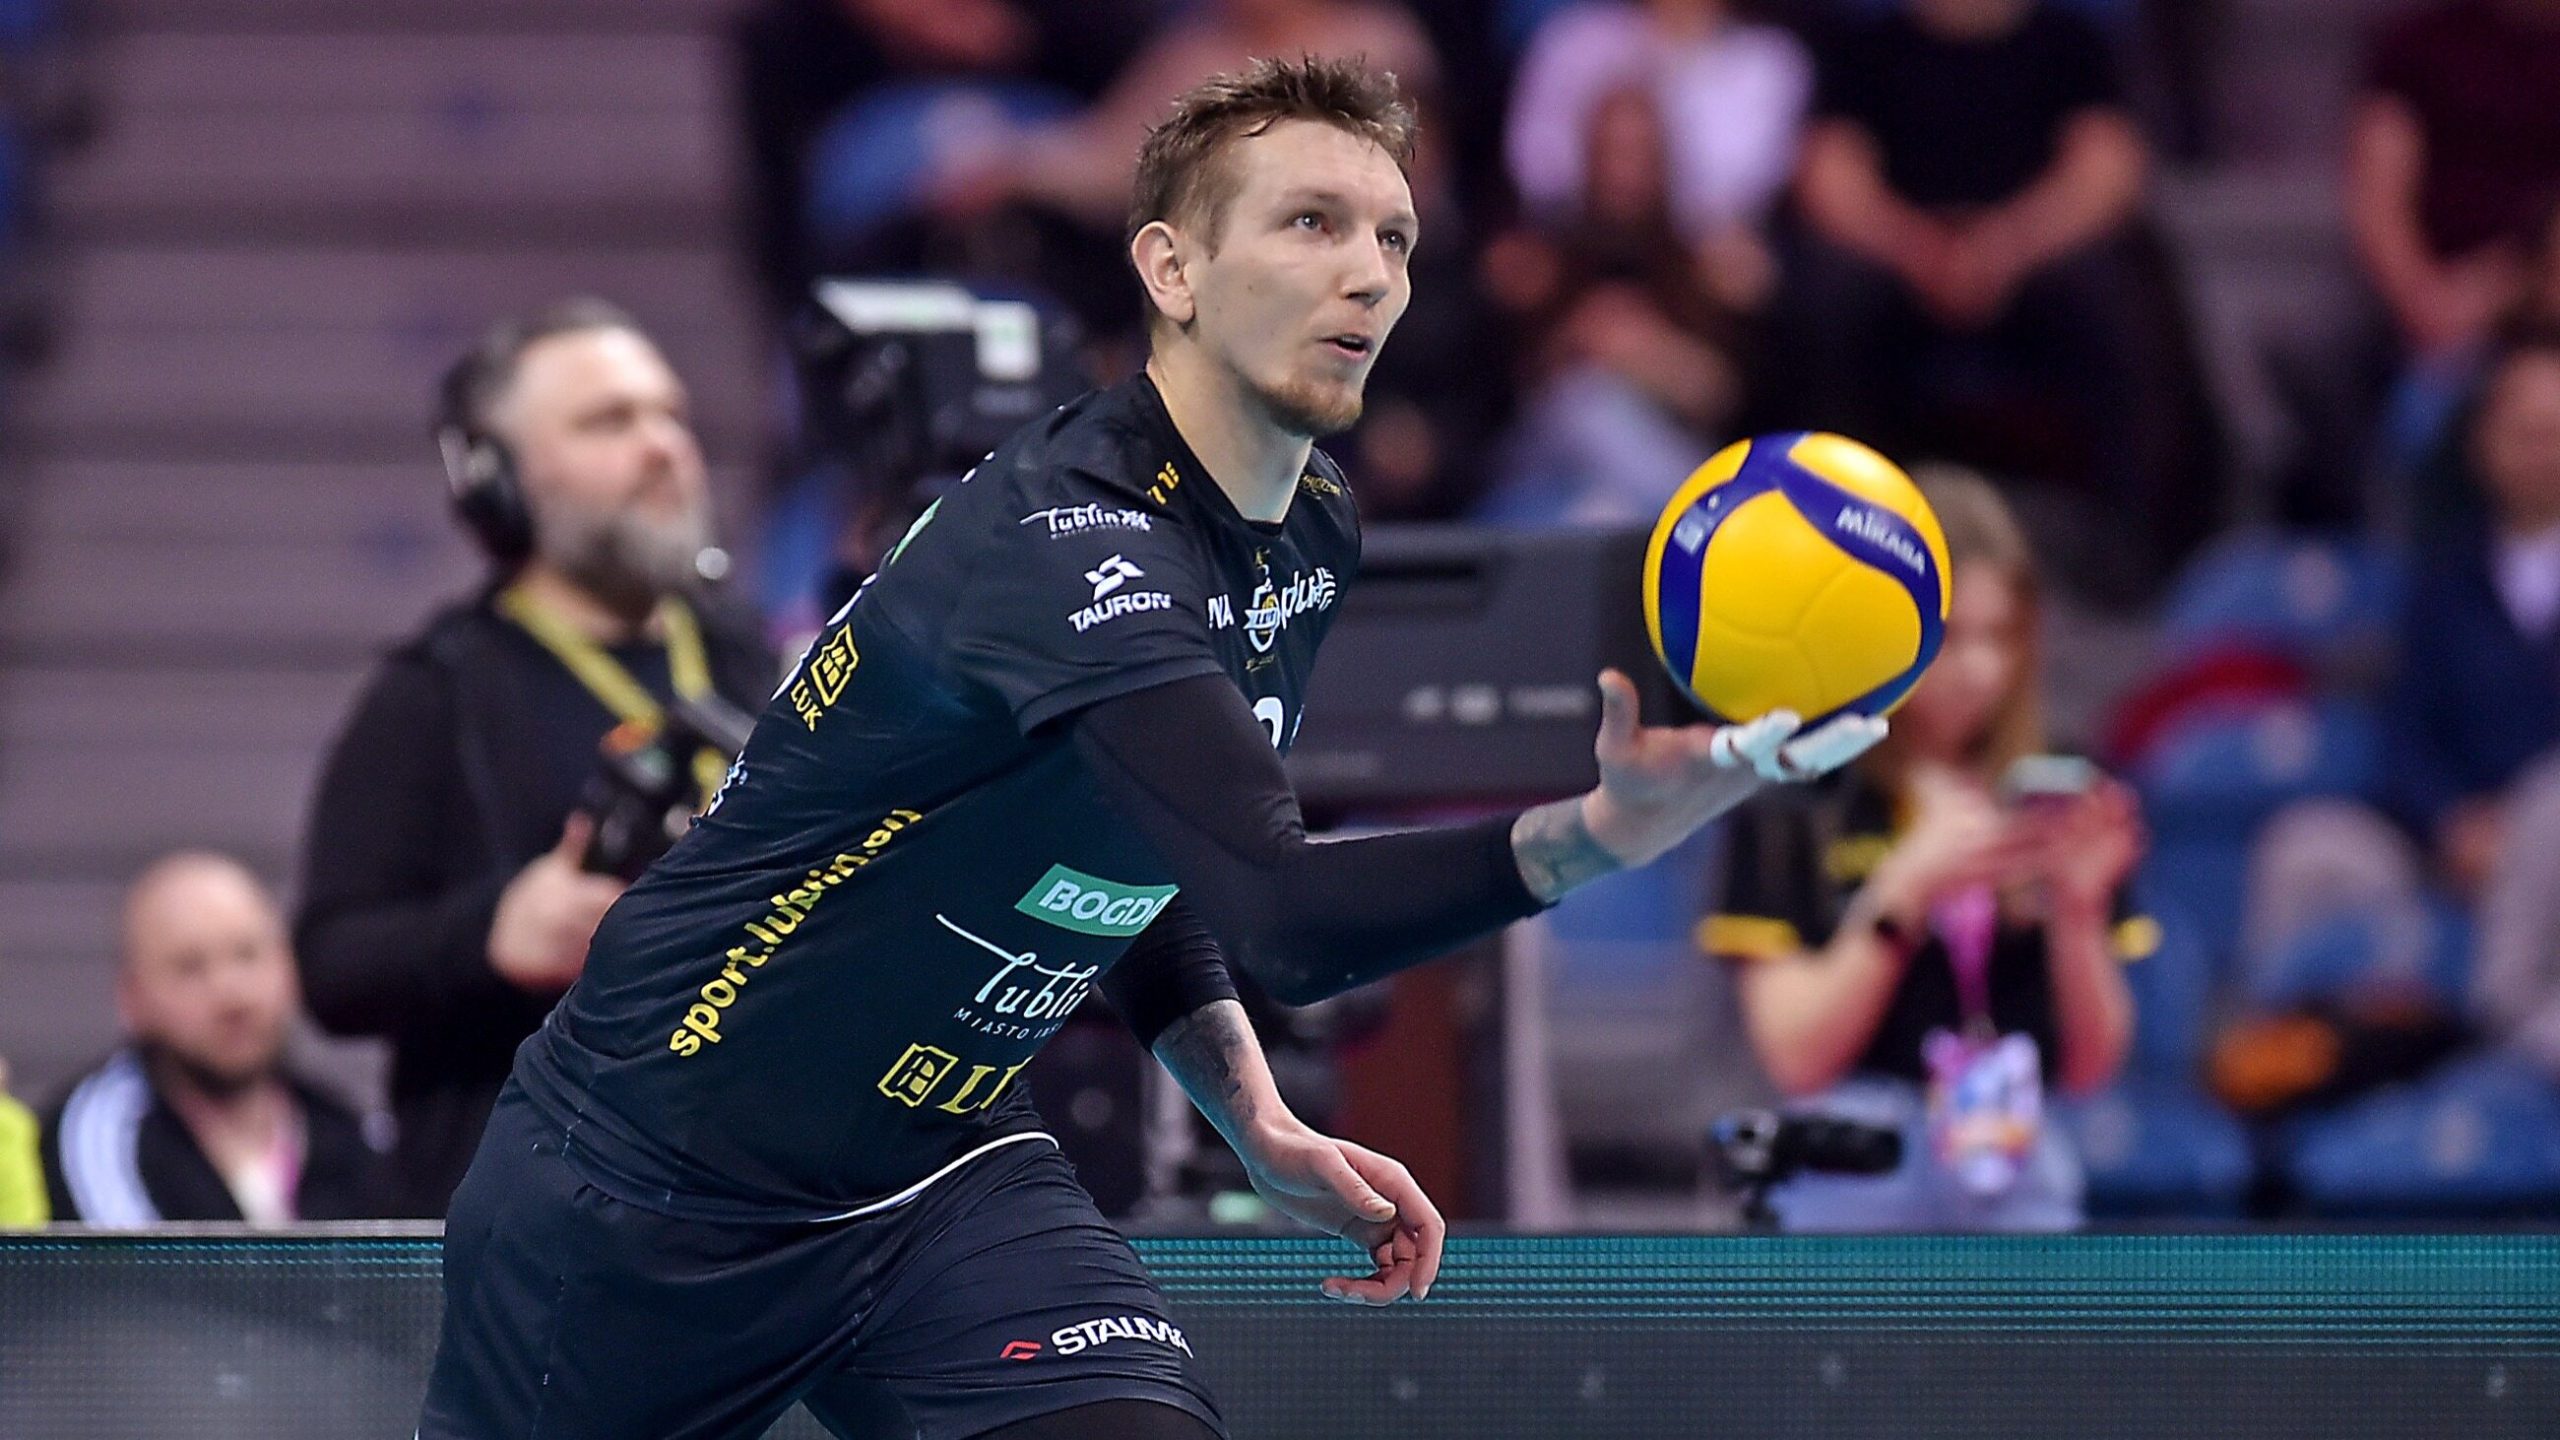 A major reinforcement of the PlusLiga newcomer.  They signed a world champion